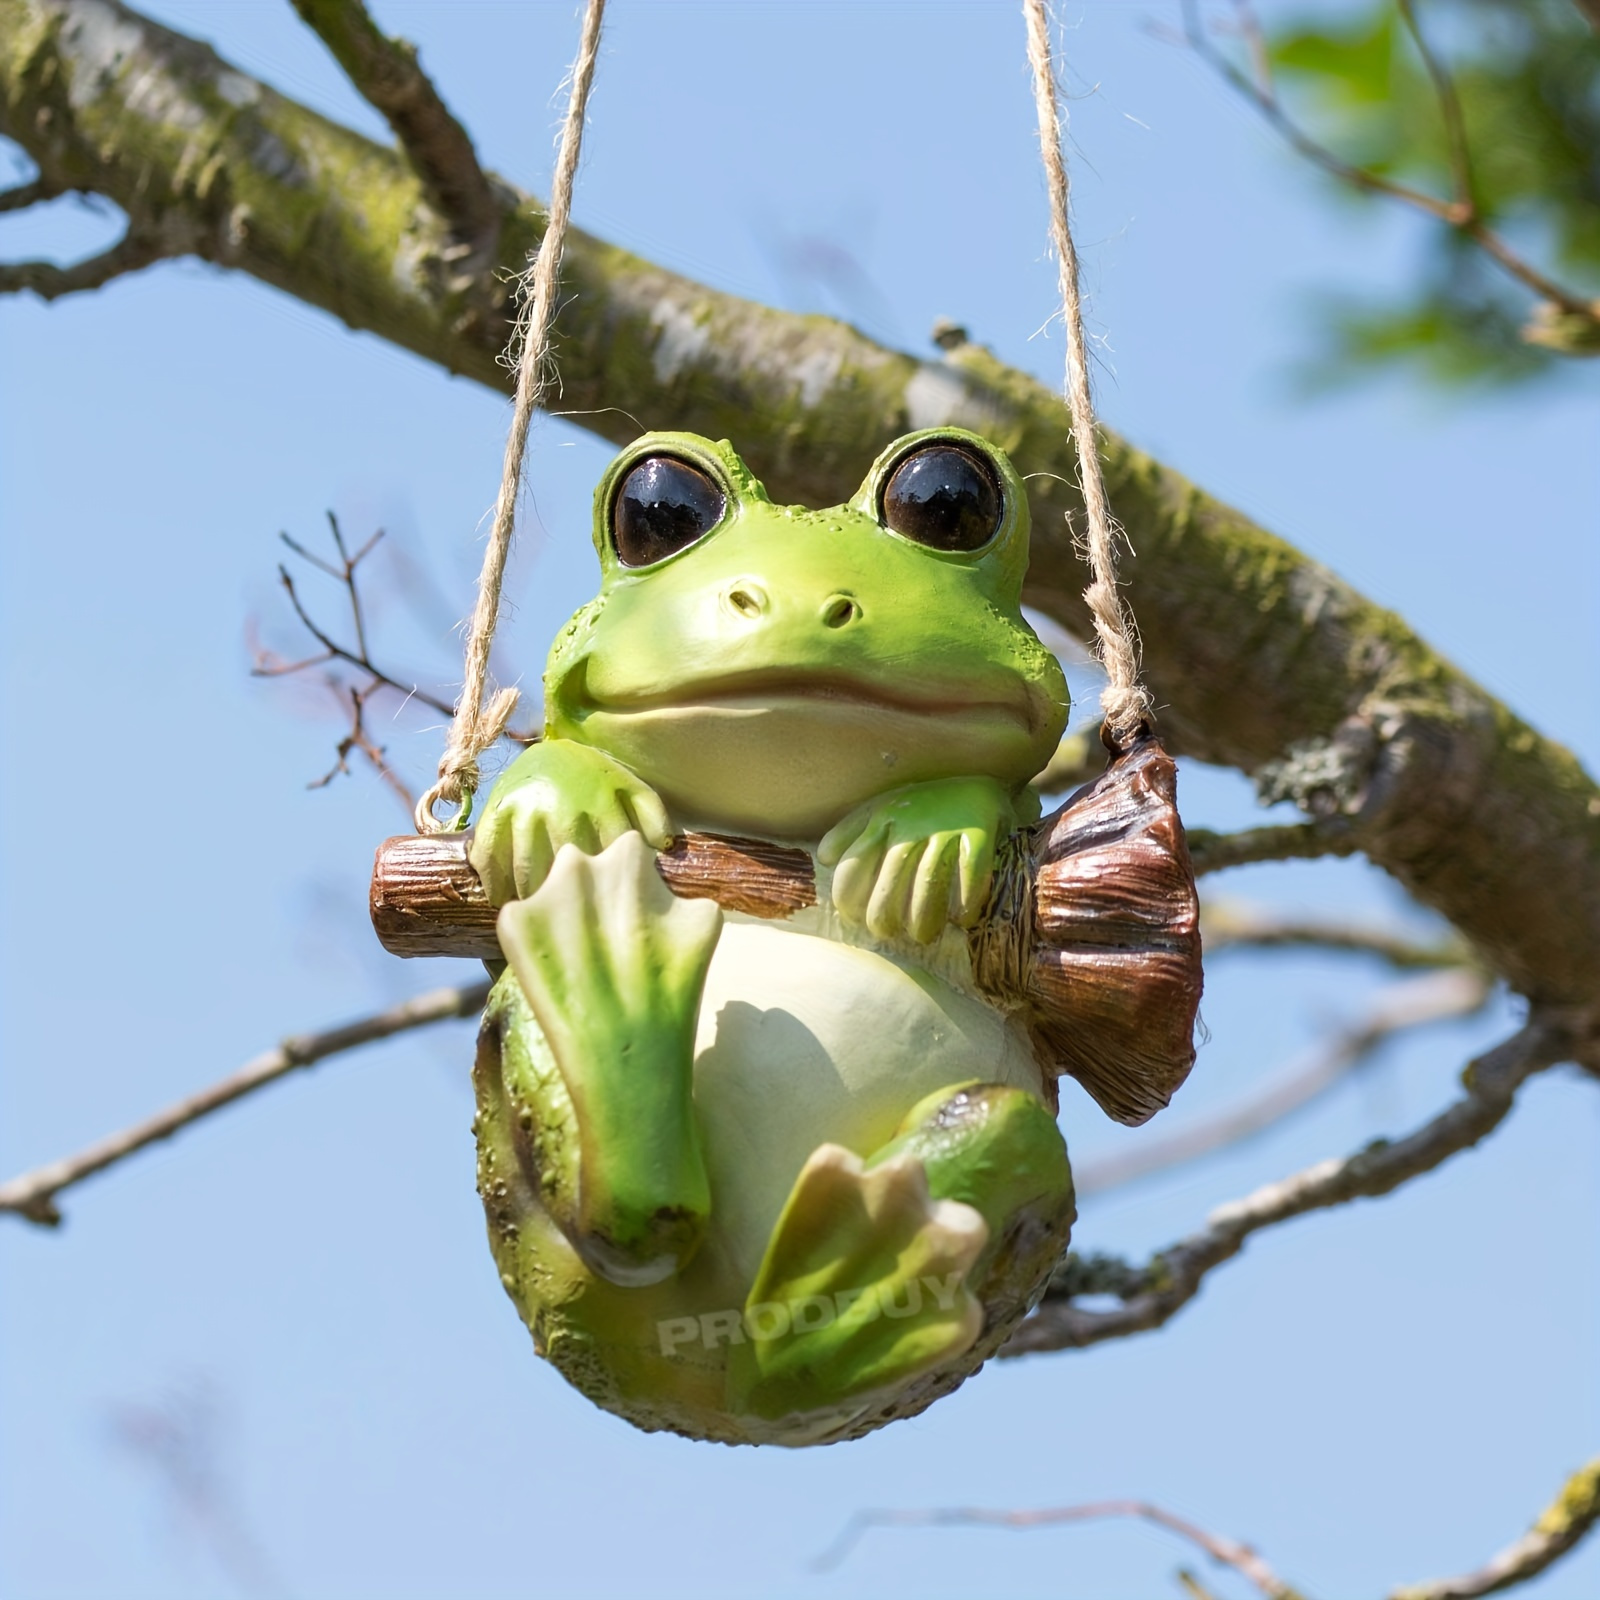 

1pc Swing Resin Frog Craft - Add A Fun And Colorful Touch To Your Garden Decor!